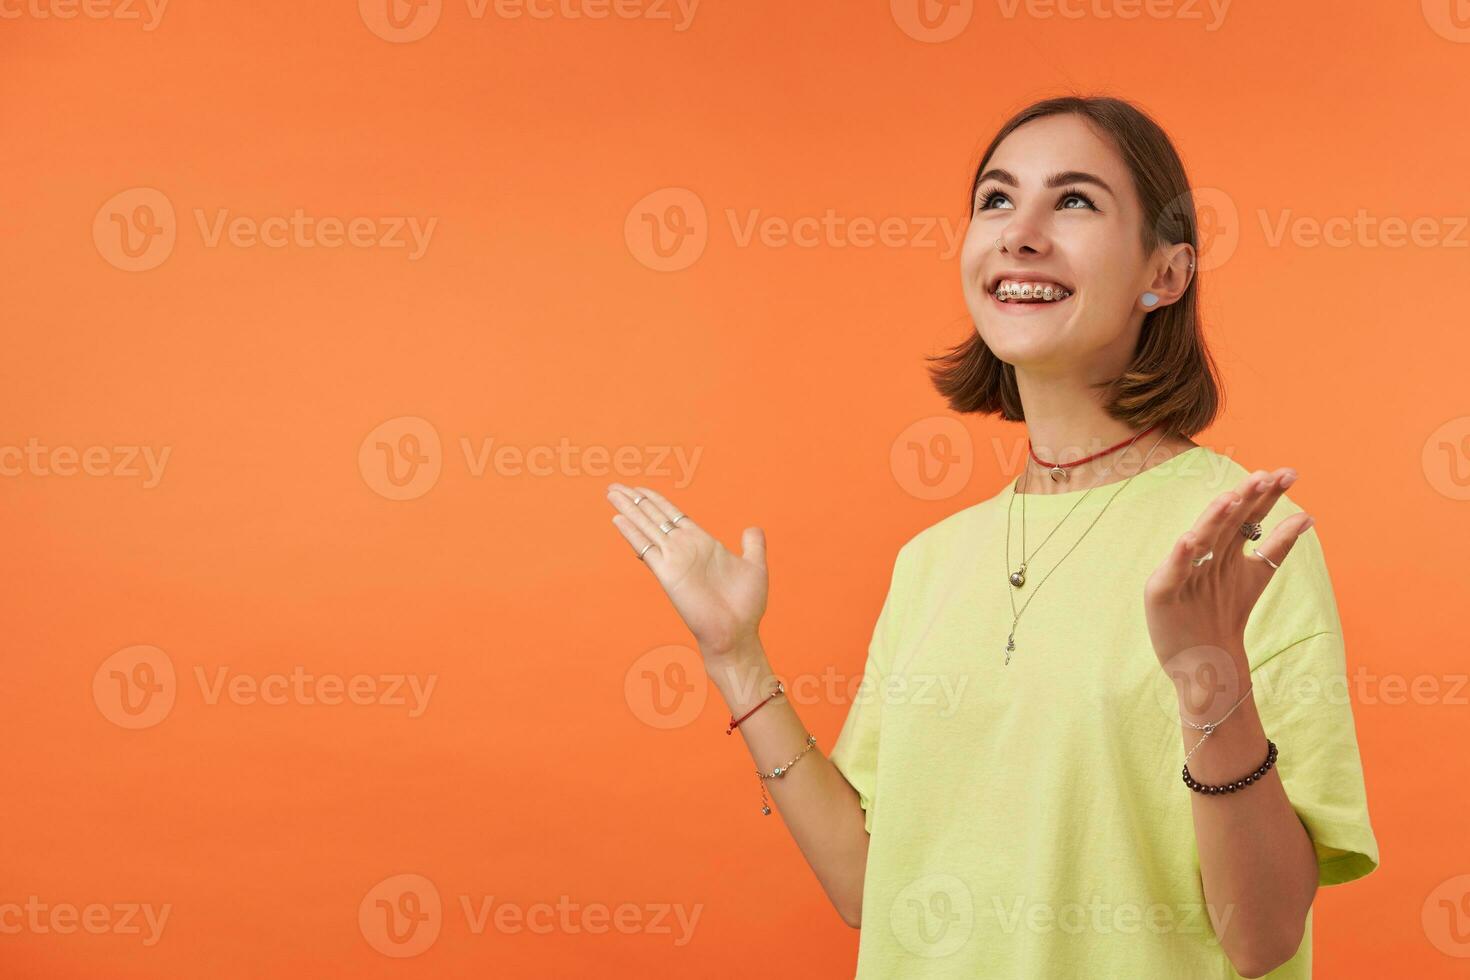 Teenage girl, cheerful and happy looking woman with brunette short hair. Happy to share feelings, feels lucky. Watch to the left and up at the copy space over orange background. Wearing green t-shirt photo